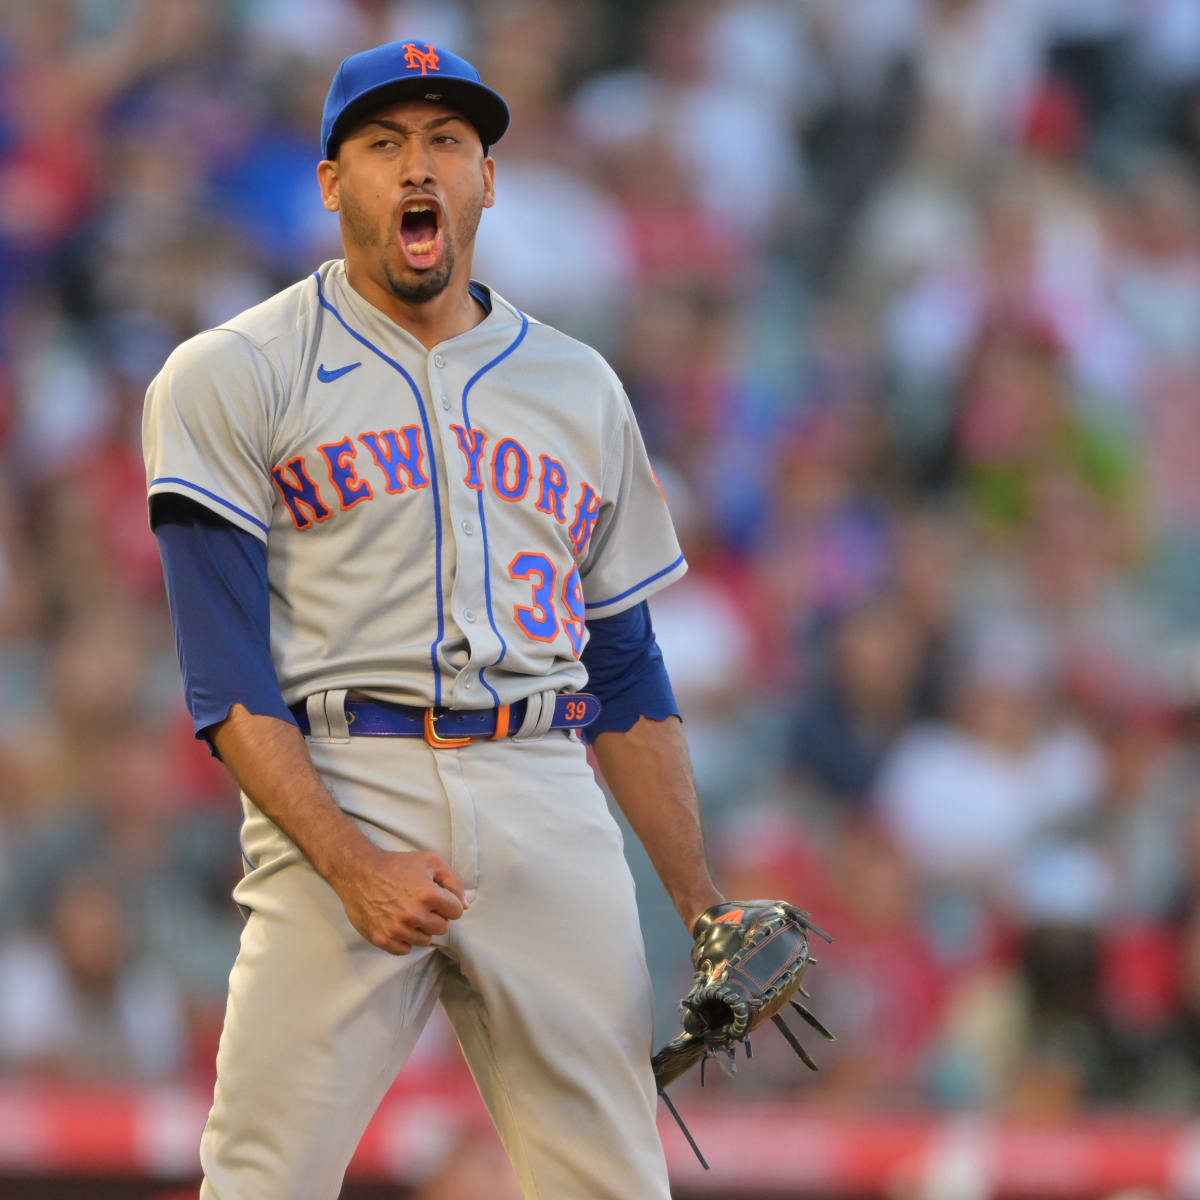 NY Mets closer Edwin Diaz pitching toward a $100 million contract